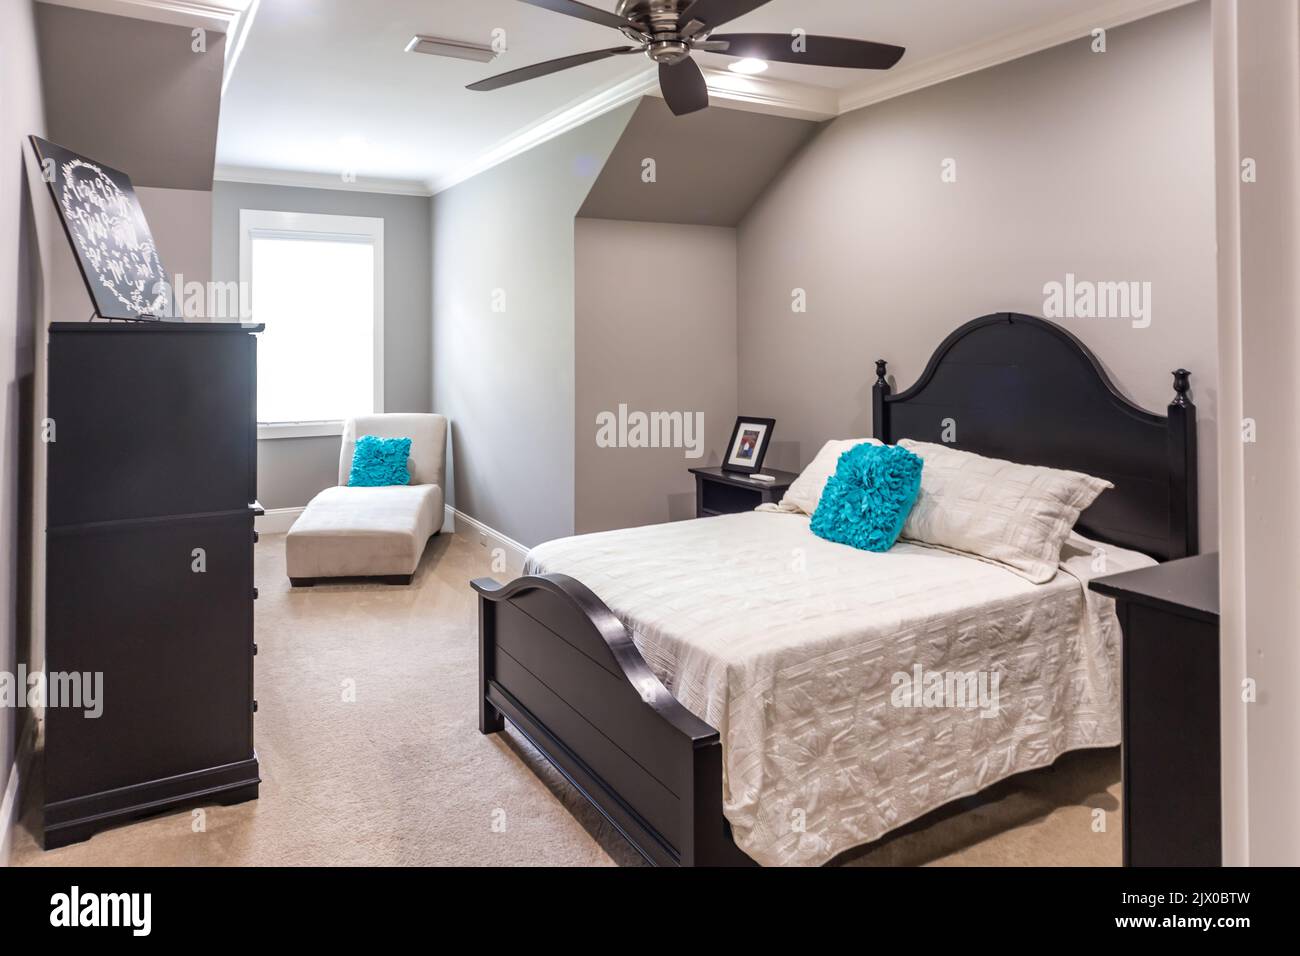 A spacious bedroom with a dark wood bed and dresser or chest and a fan and chaisse chair. Stock Photo